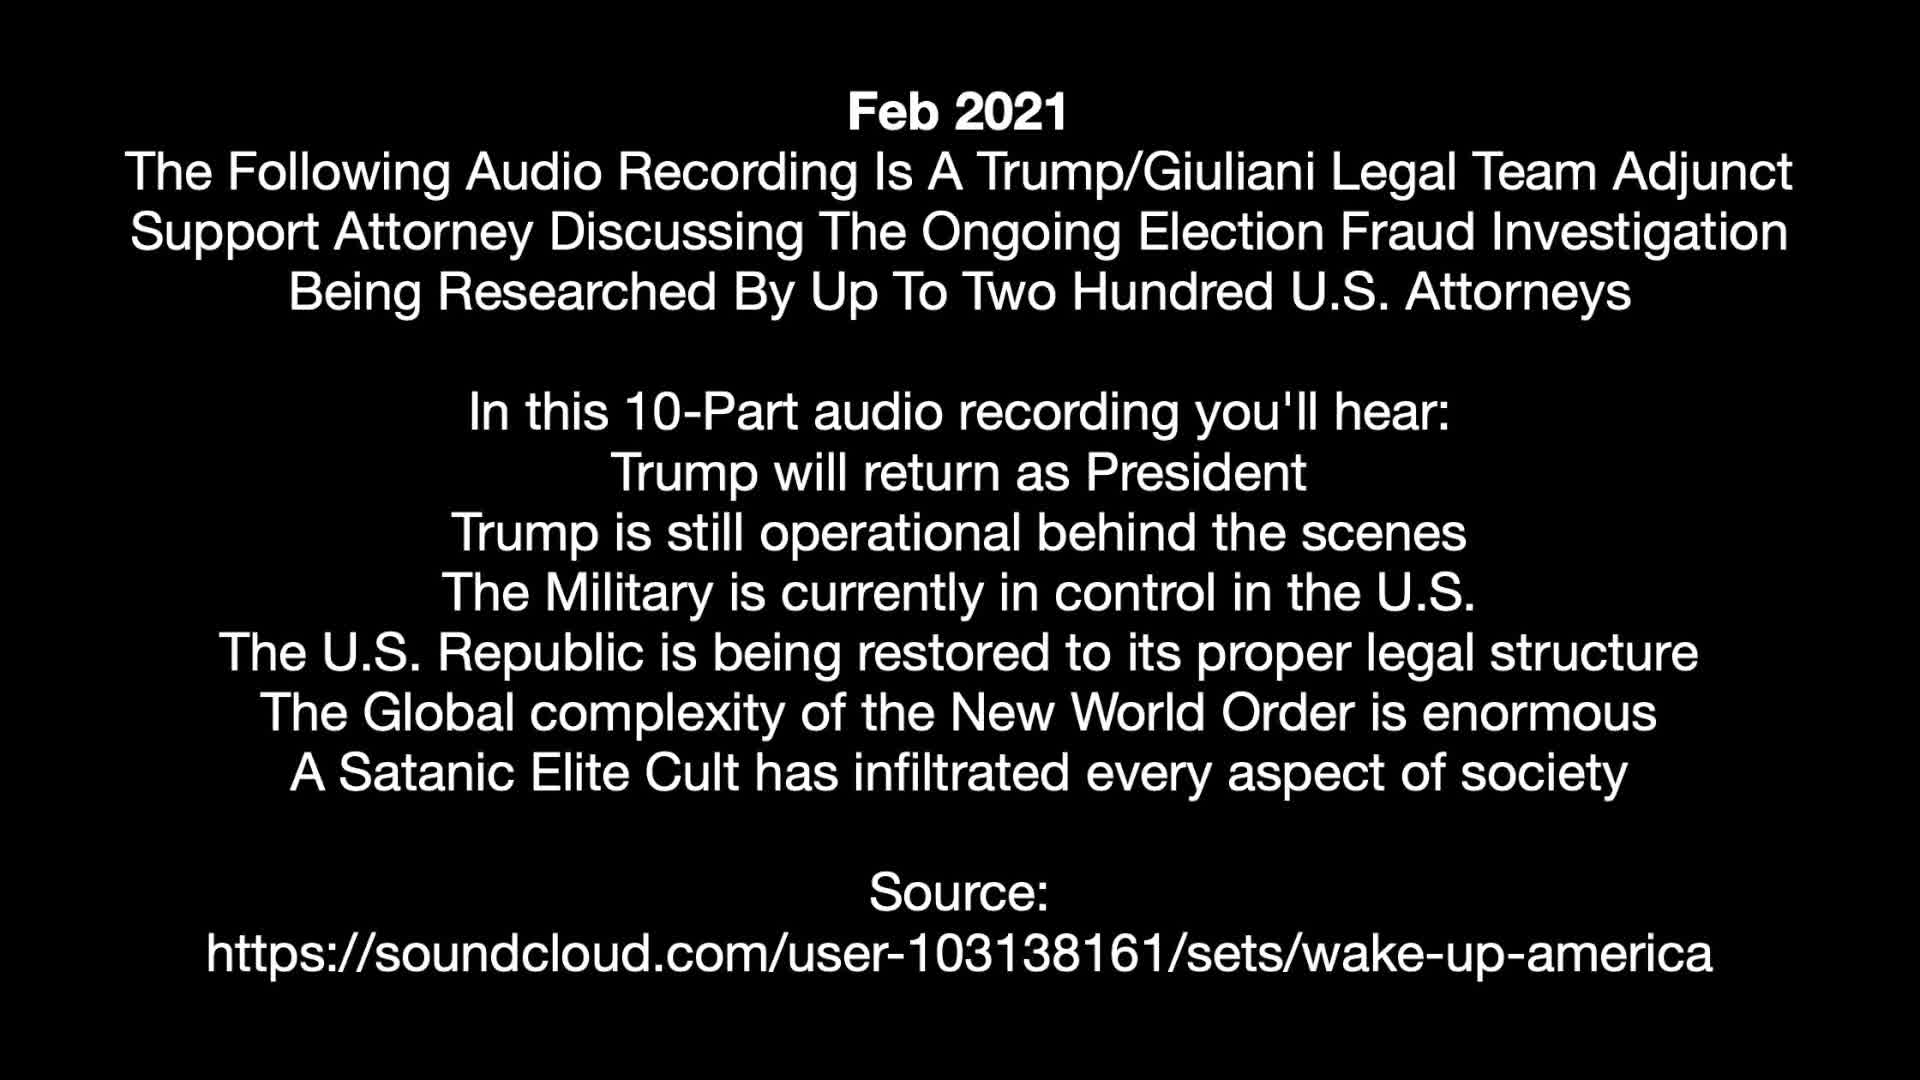 Feb 2021 - Trump's Return - Insider Attorney Discussing Ongoing U.S. Election Fraud Investigations